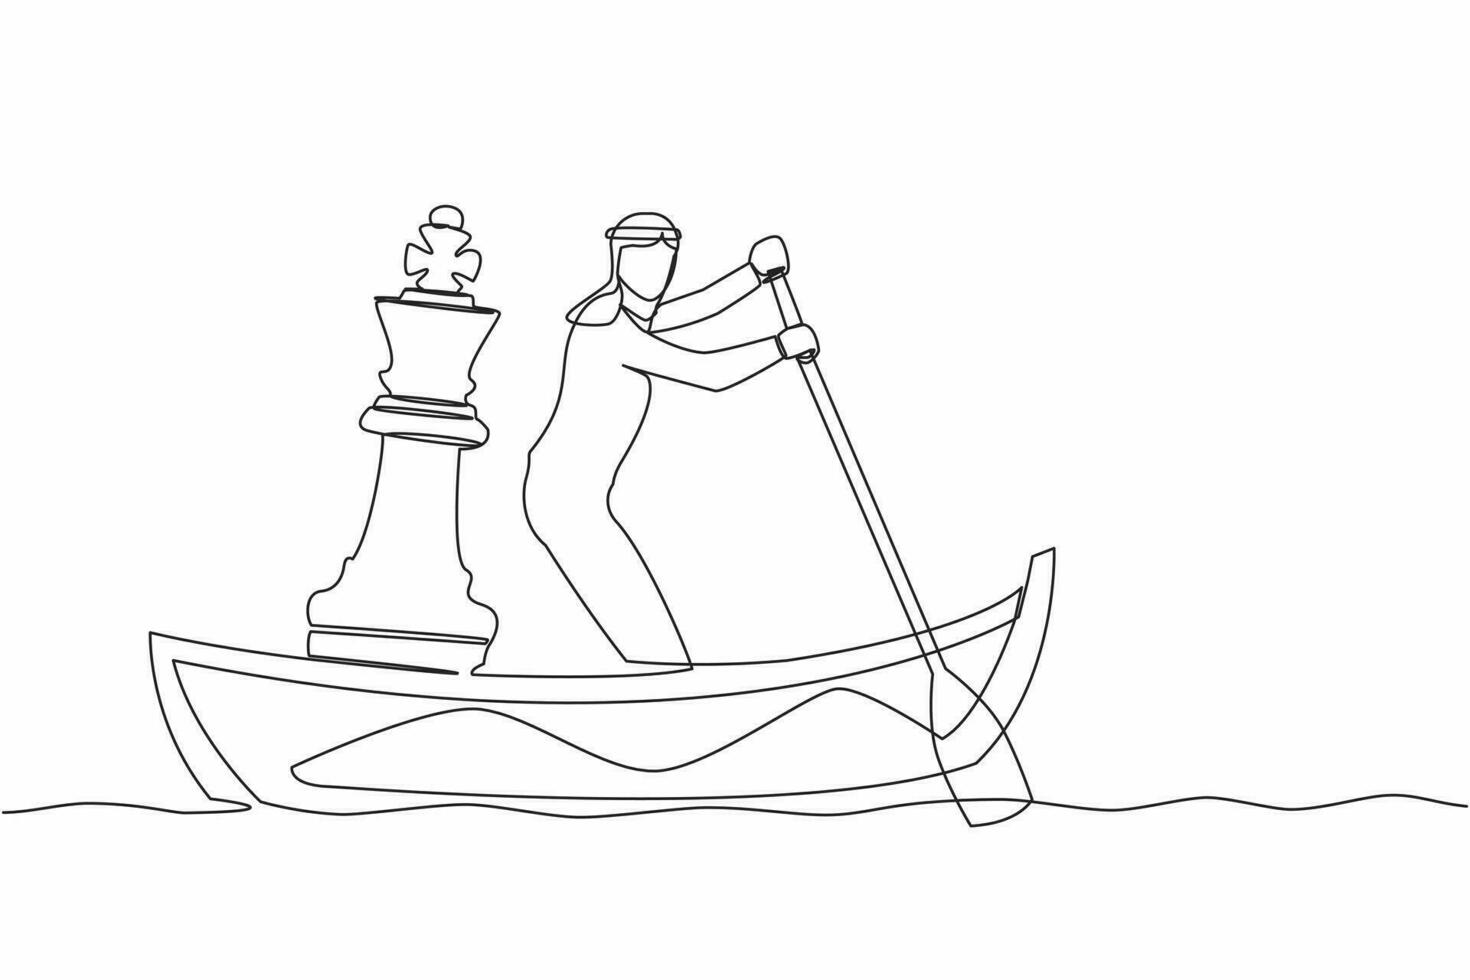 Single one line drawing Arab businessman sailing away on boat with chess king piece. Company strategy or tactical move to winning business competition. Continuous line draw design vector illustration